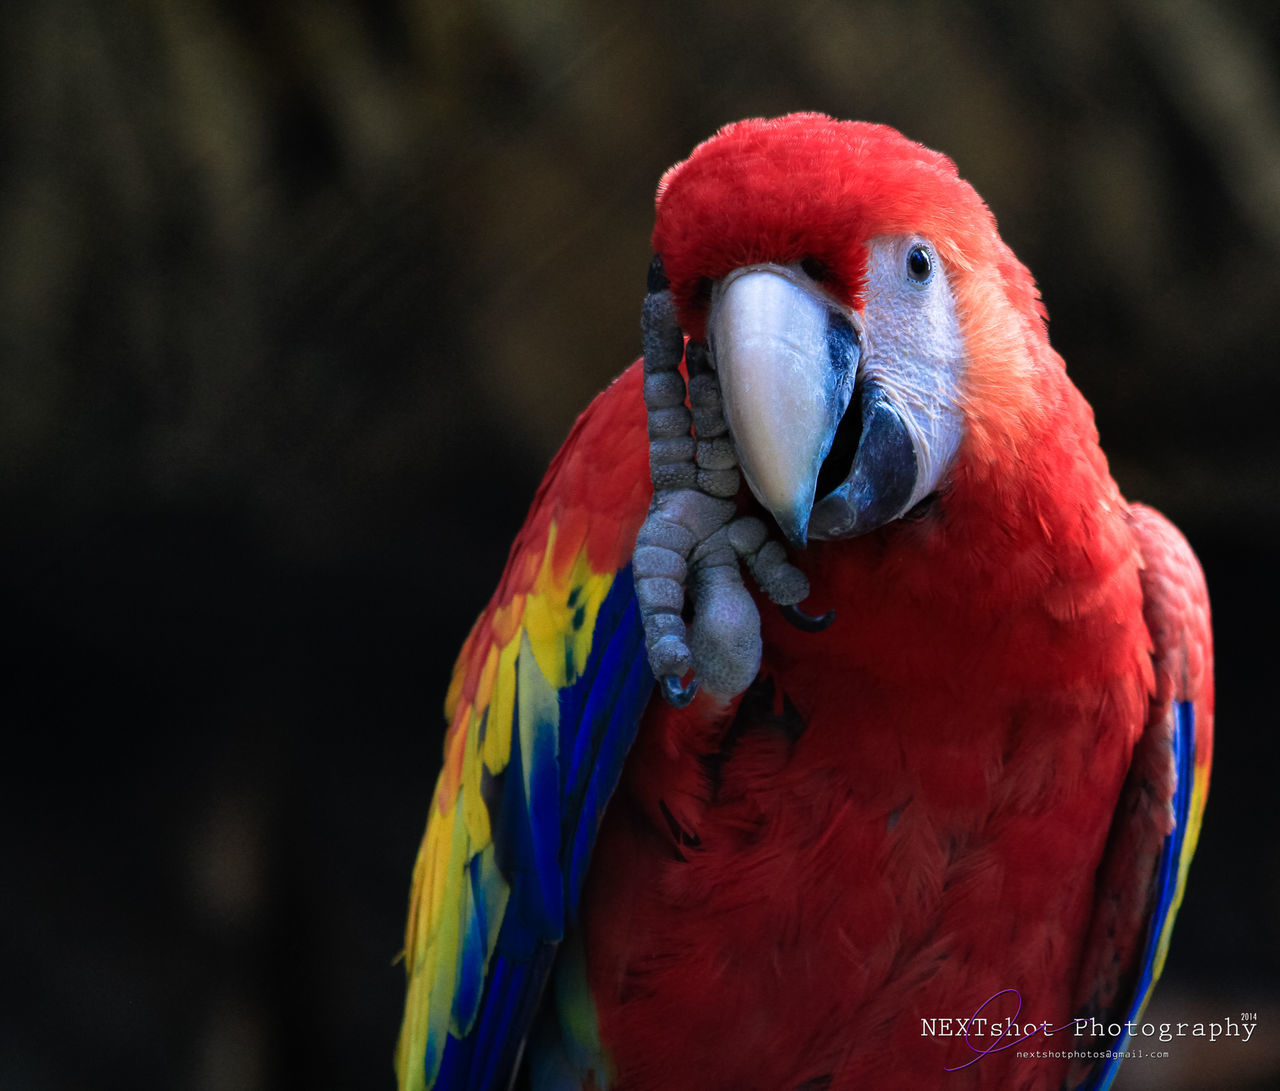 bird, animal themes, animals in the wild, beak, one animal, wildlife, close-up, multi colored, focus on foreground, parrot, animal head, red, nature, feather, outdoors, no people, beauty in nature, day, zoology, macaw